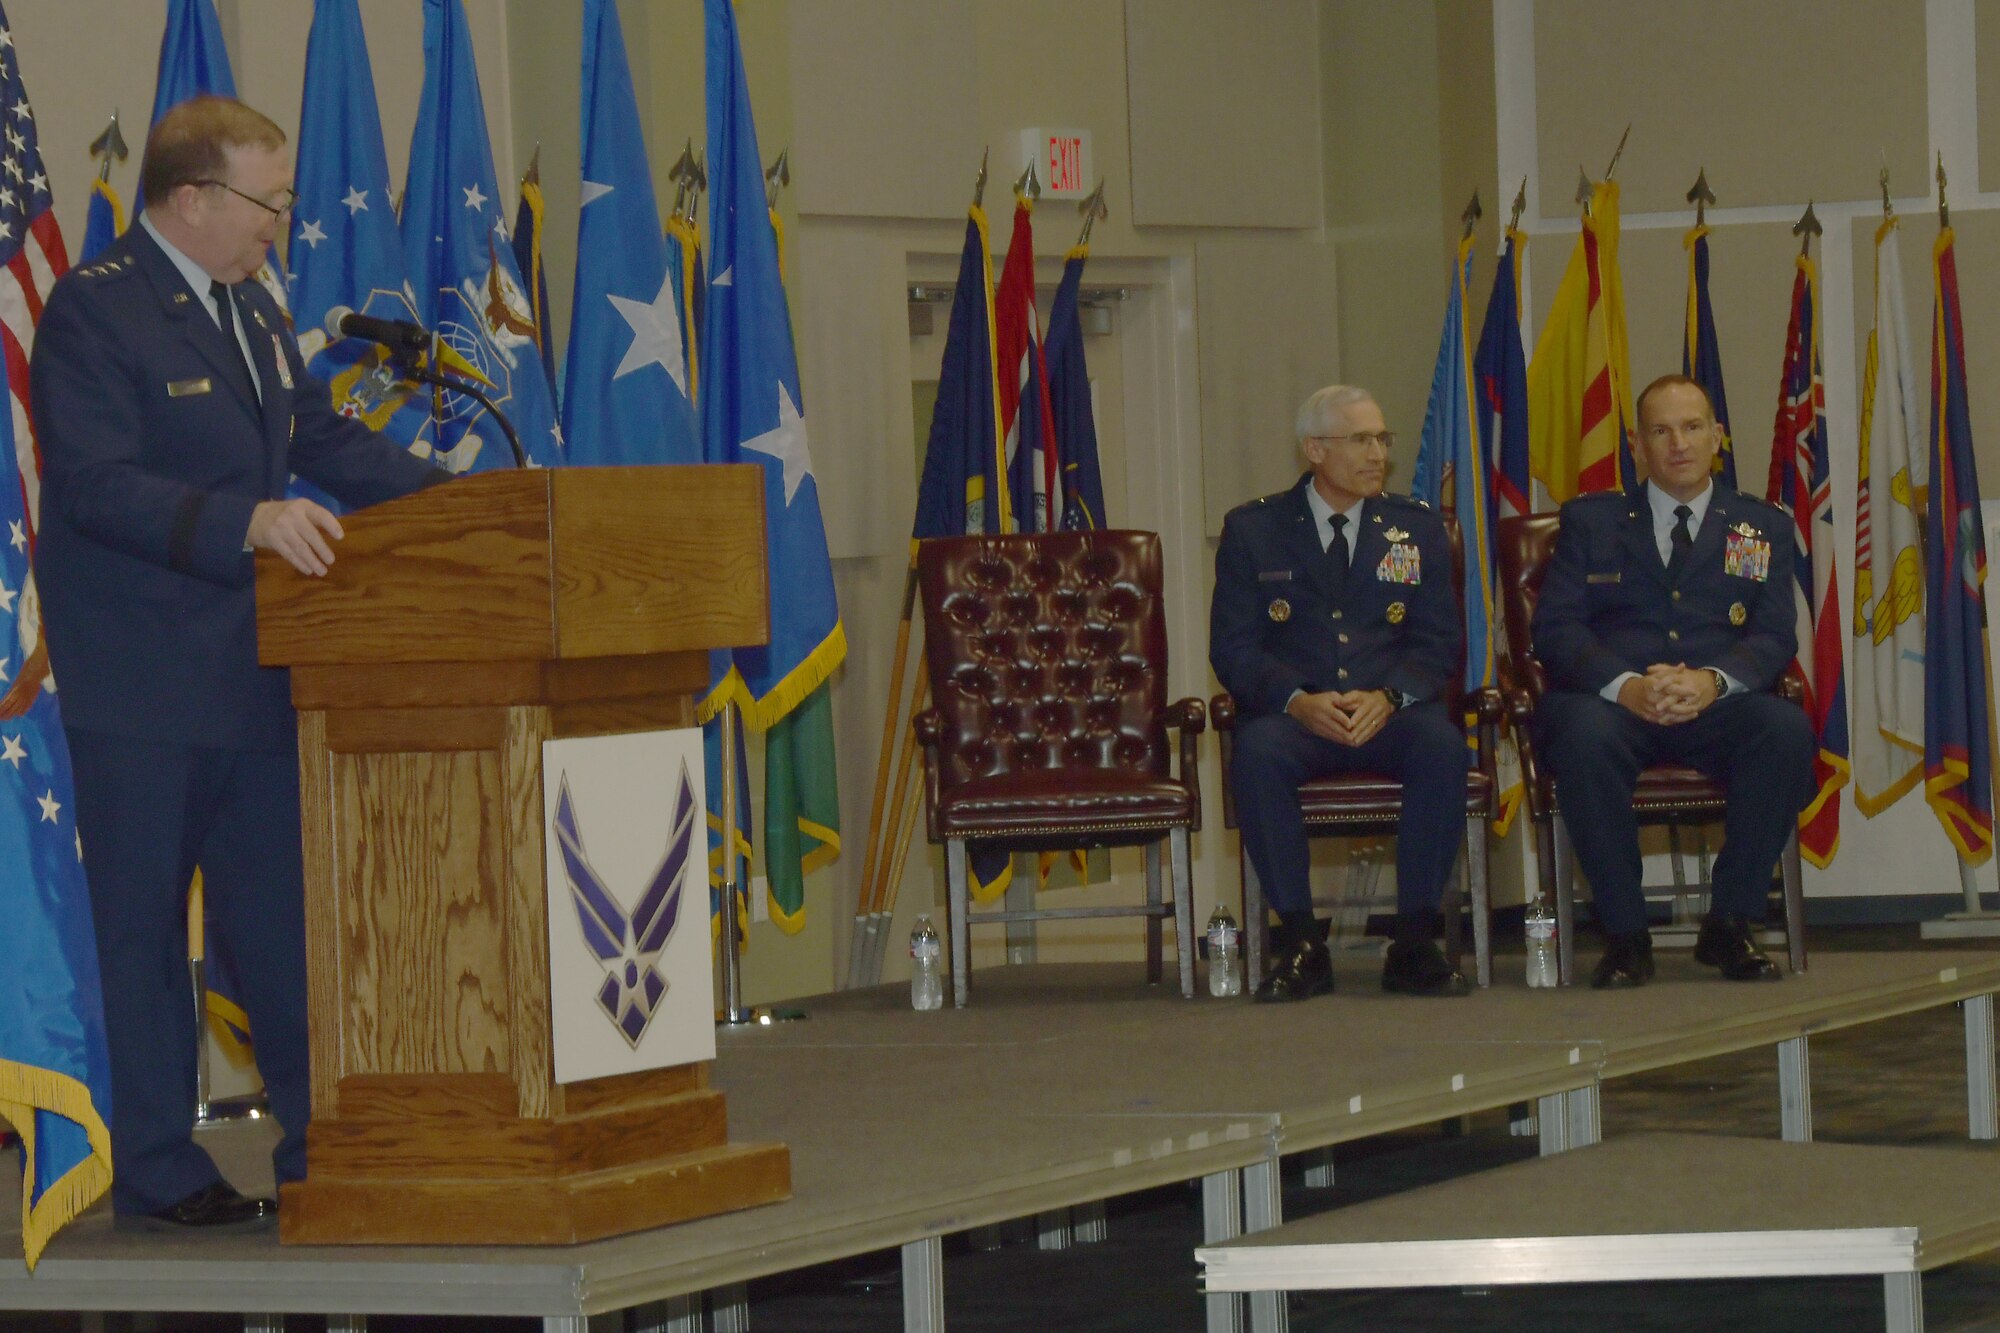 Lt. Gen. Richard W. Scobee, Chief of Air Force Reserve and Air Force Reserve commander, makes remarks, July 26, 2019, at Dobbins Air Reserve Base, Ga.